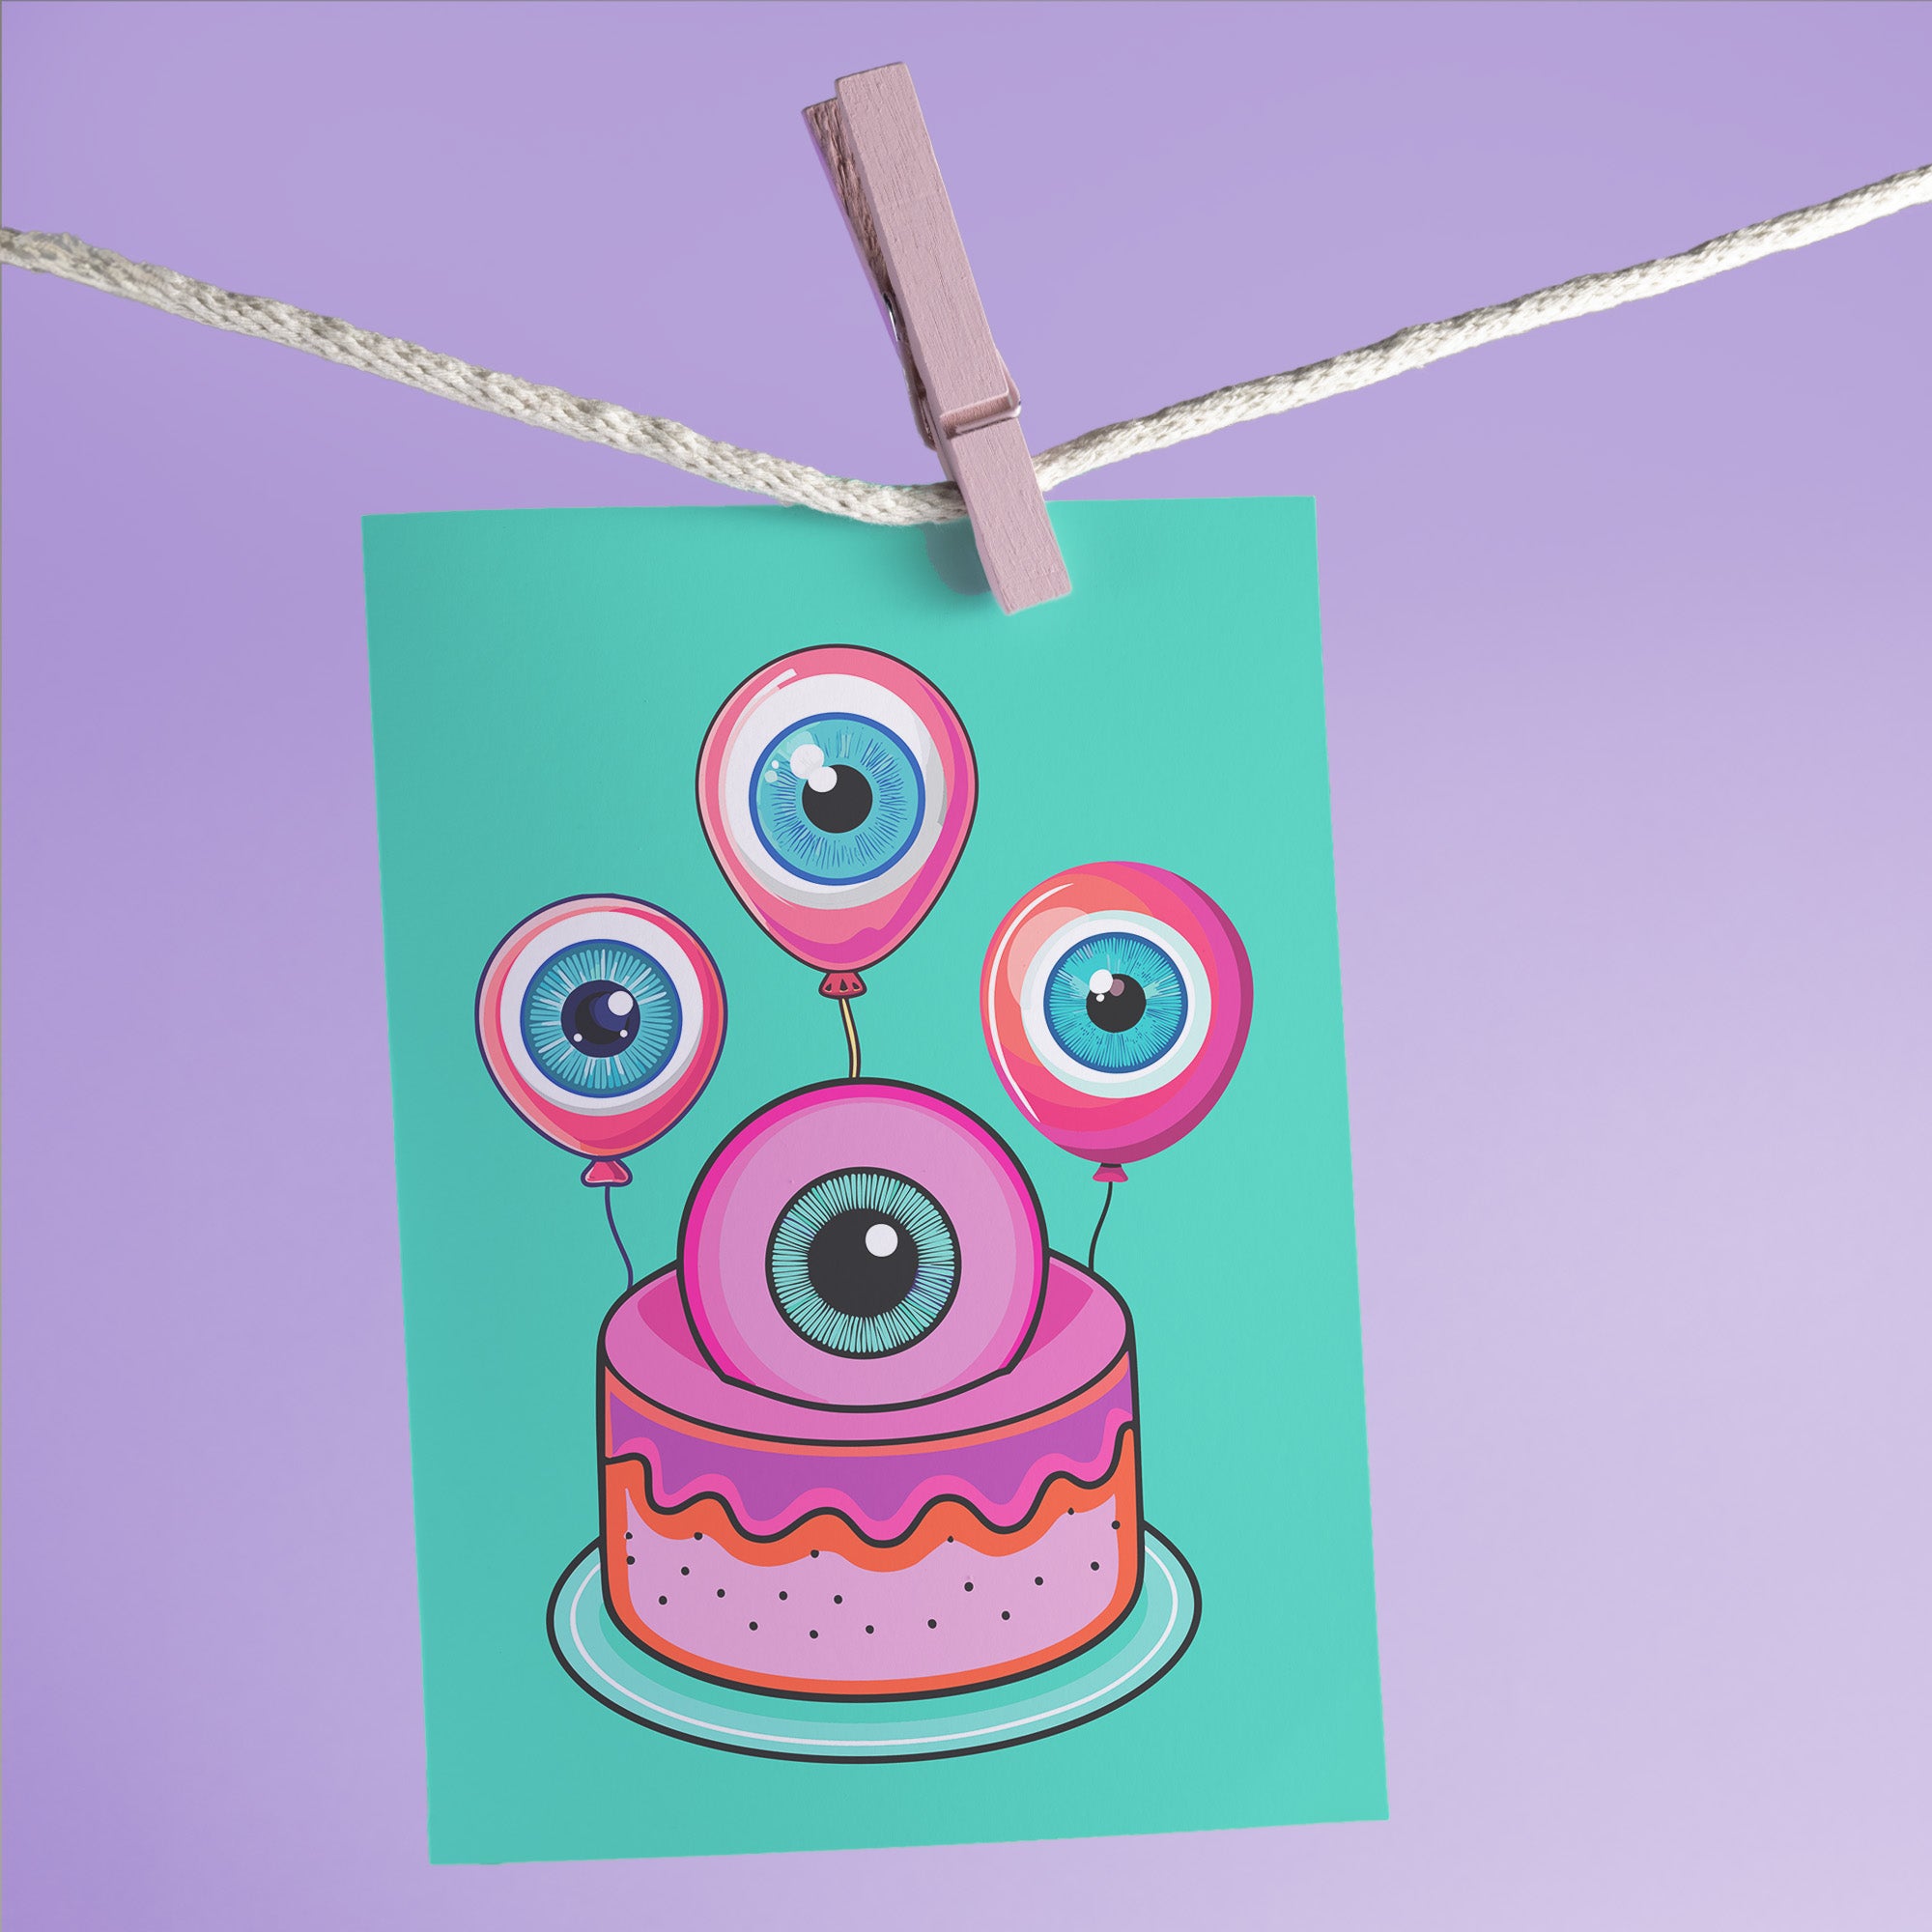 Quirky birthday card illustration on teal background. Pink cake with large eyeball on top. Three eyeball balloons float above the cake. Each eyeball has a blue iris with pink outer ring. Inside message: 